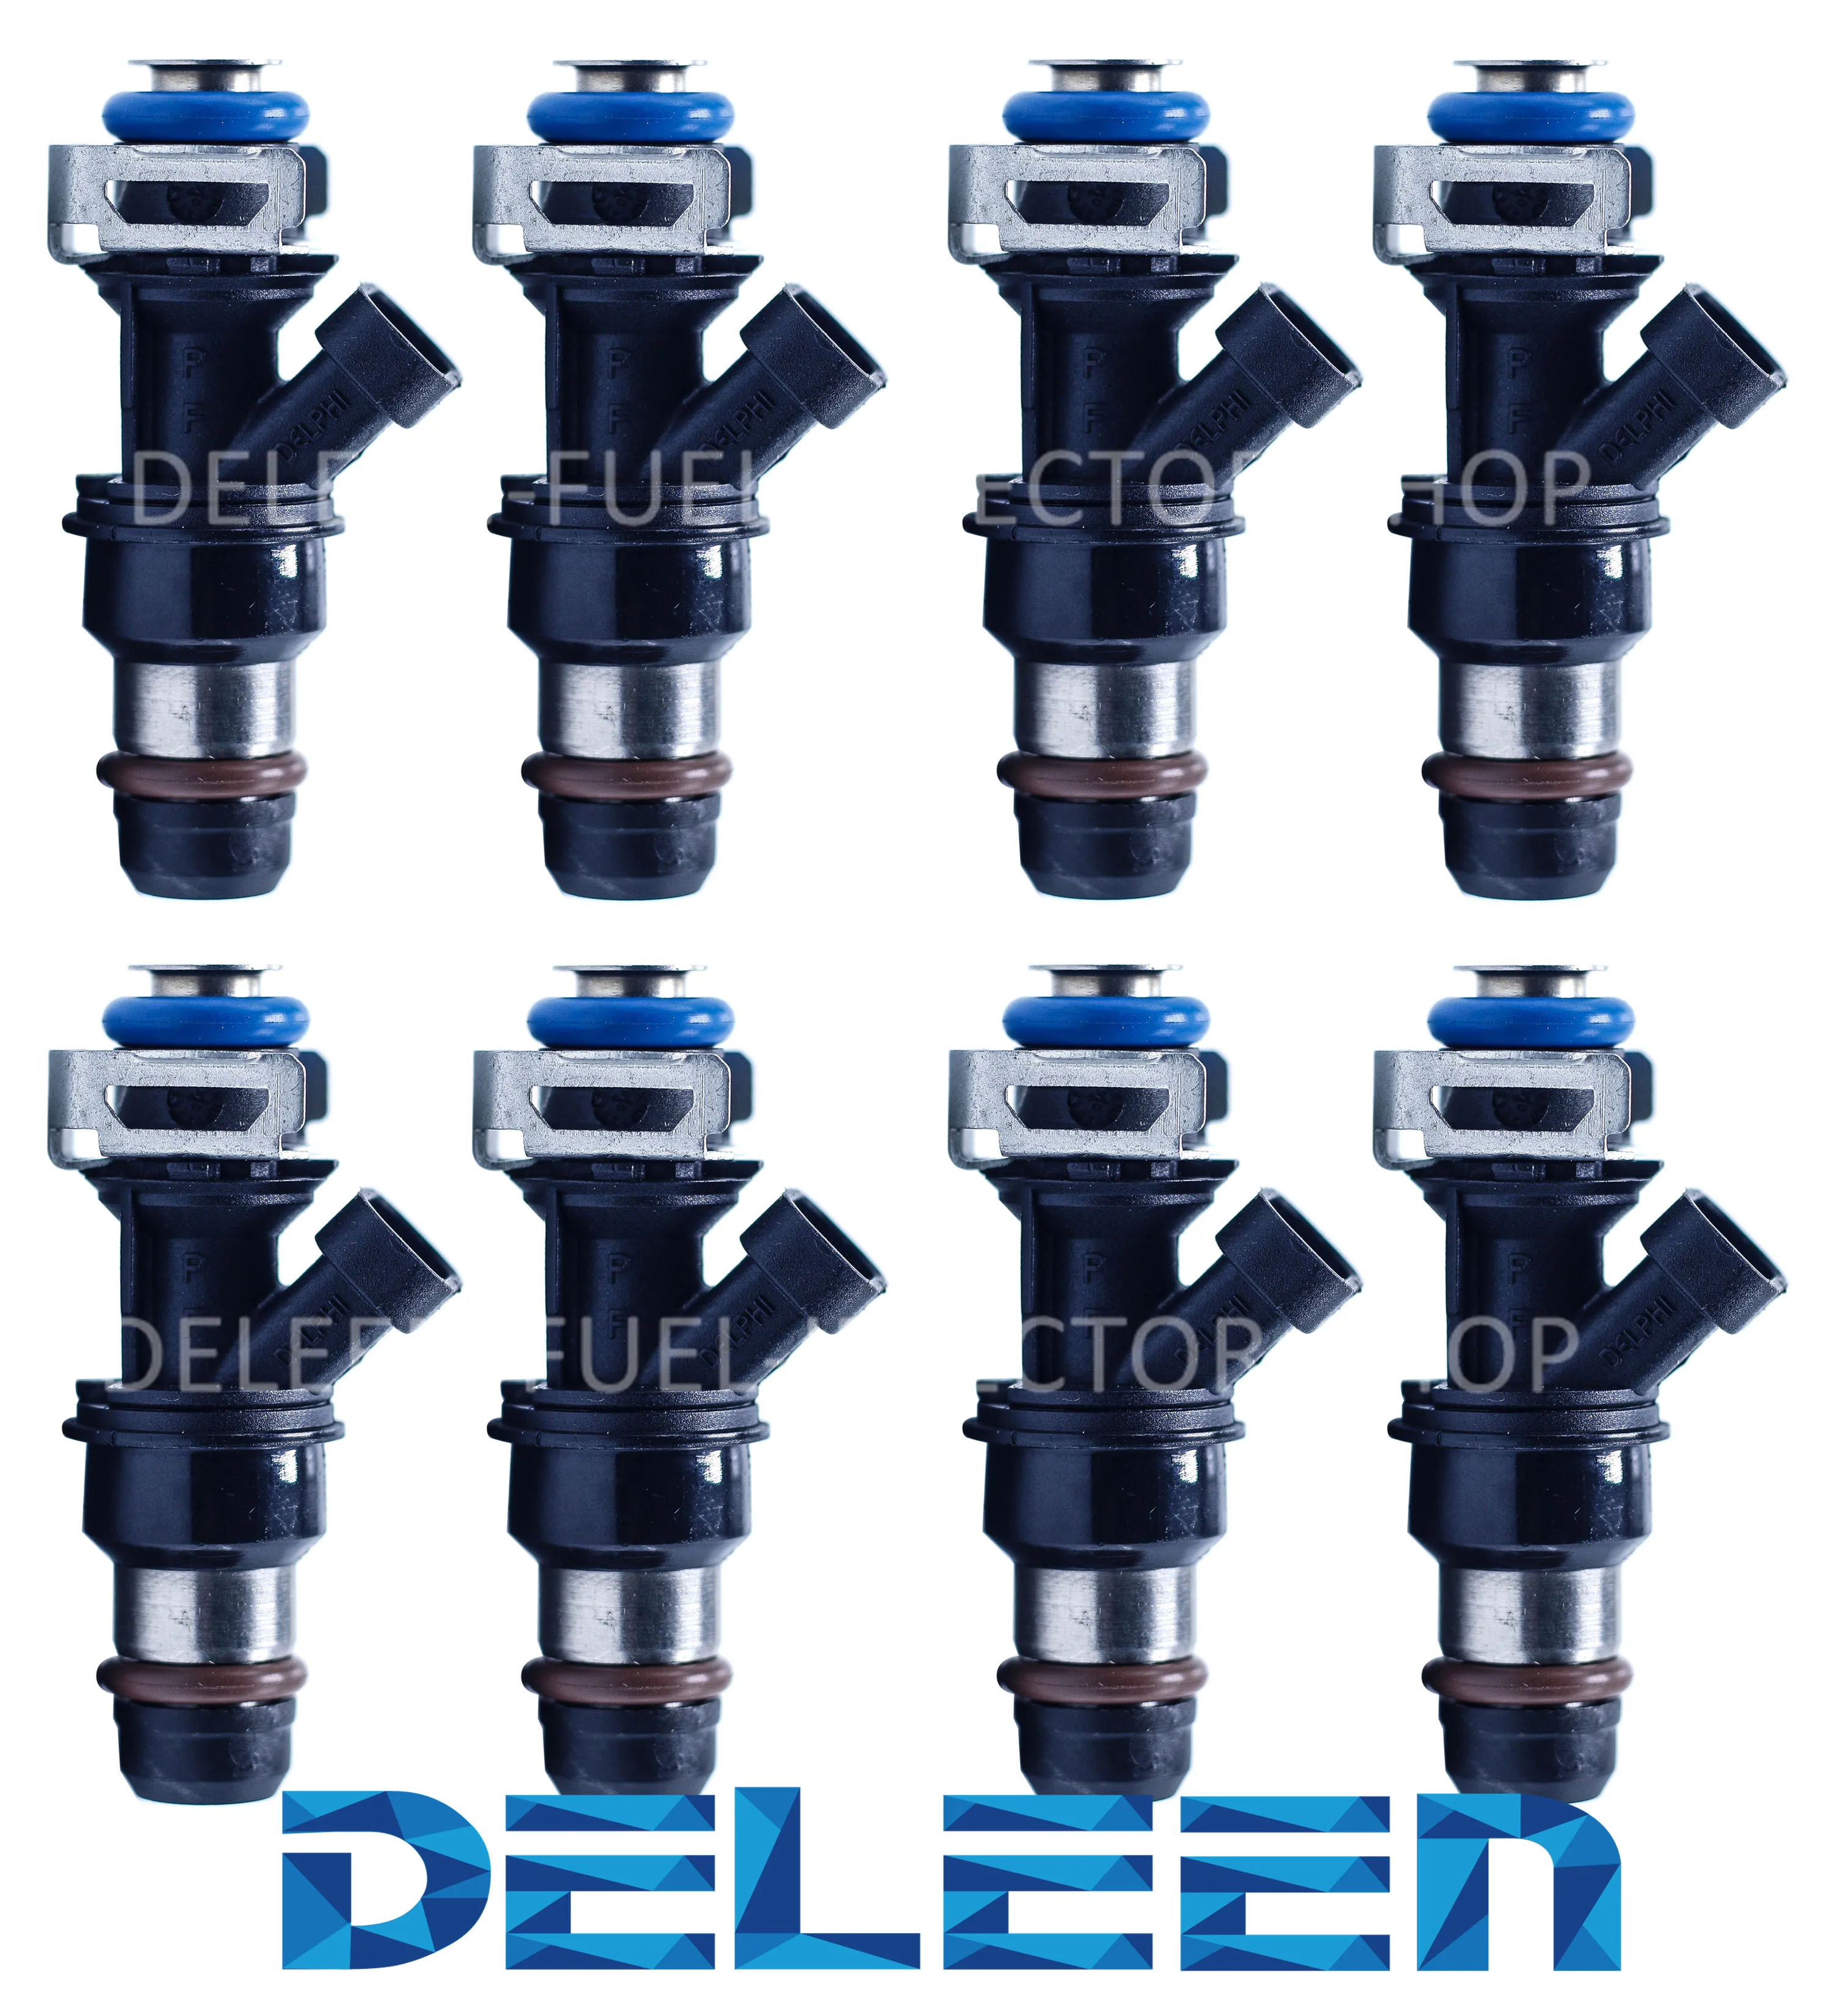 

Deleen 8x High impedance Fuel Injector 2003-2007 C hevrolet Express 3500 4.8L 6.0L For C hevrolet Car Accessories